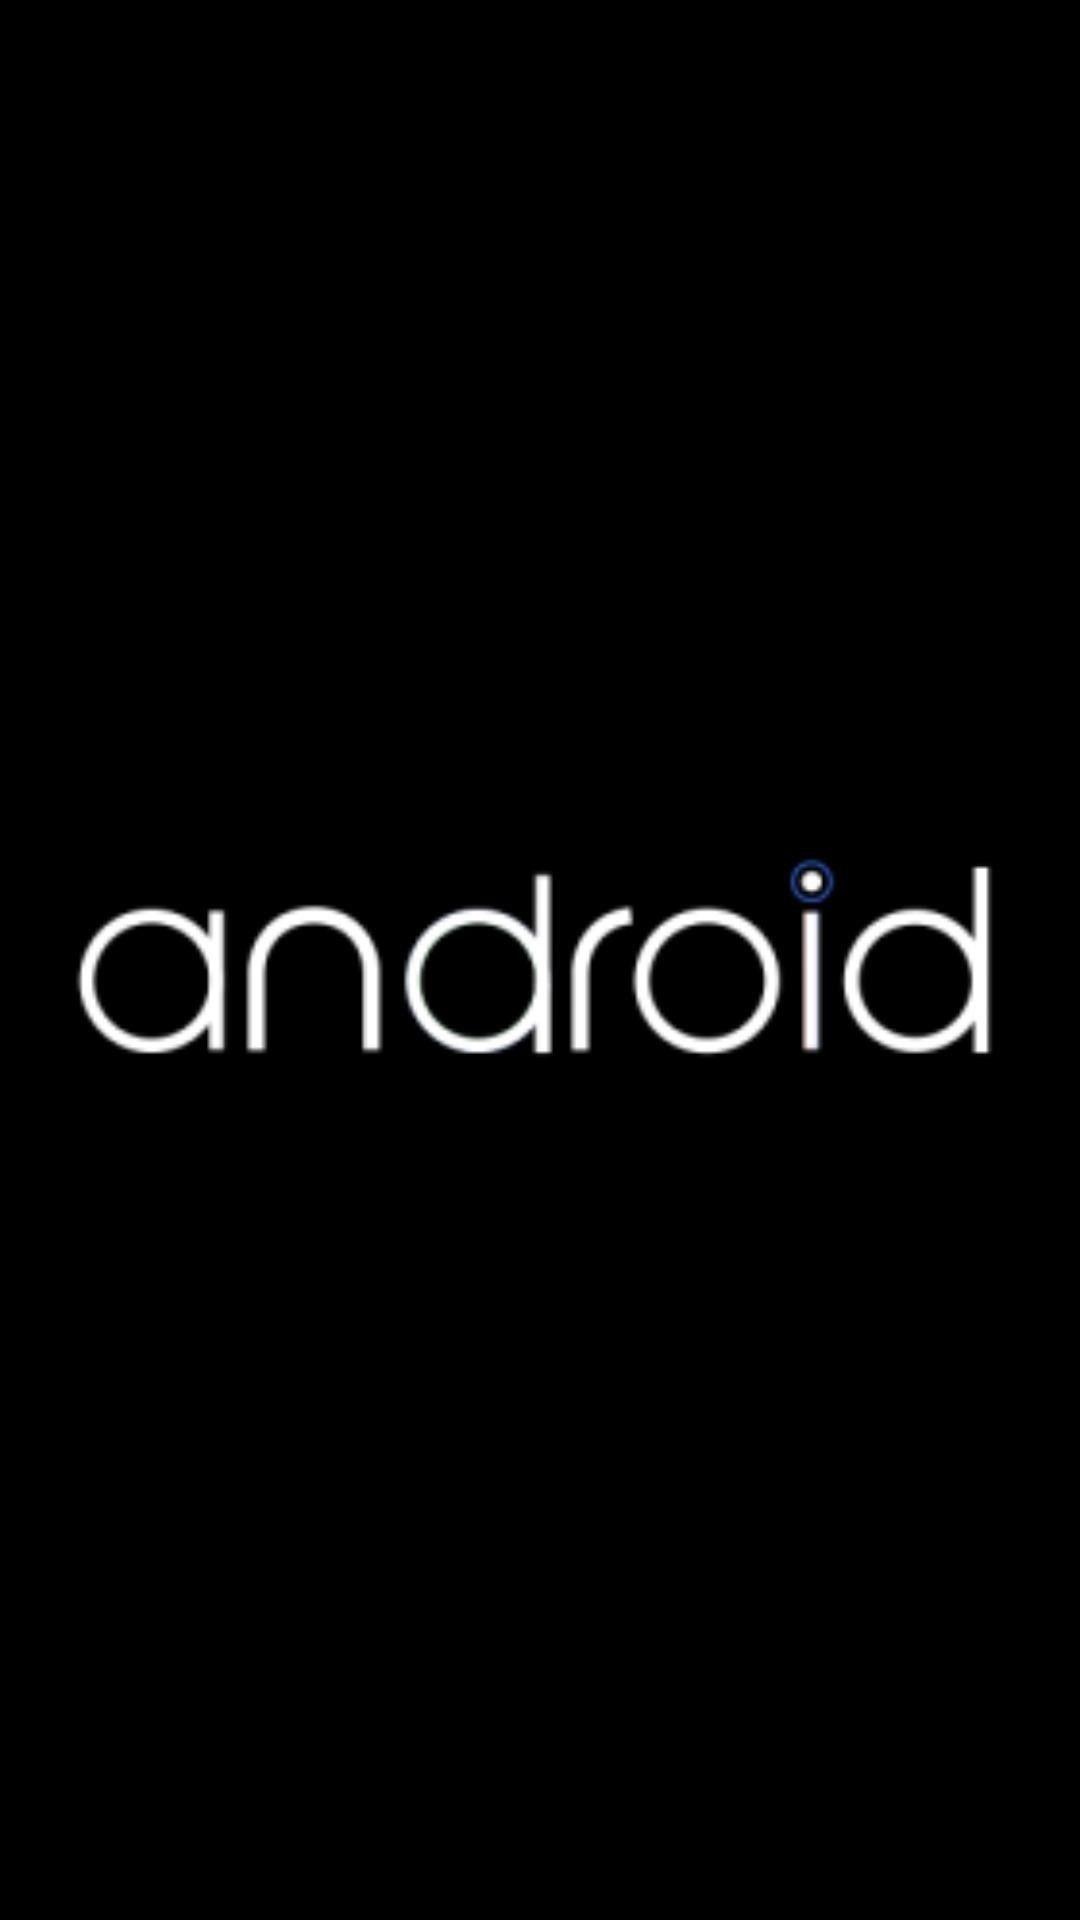 Nexus 5 Logo - New Android Logo? Install the LG G Watch Boot Animation on Your ...